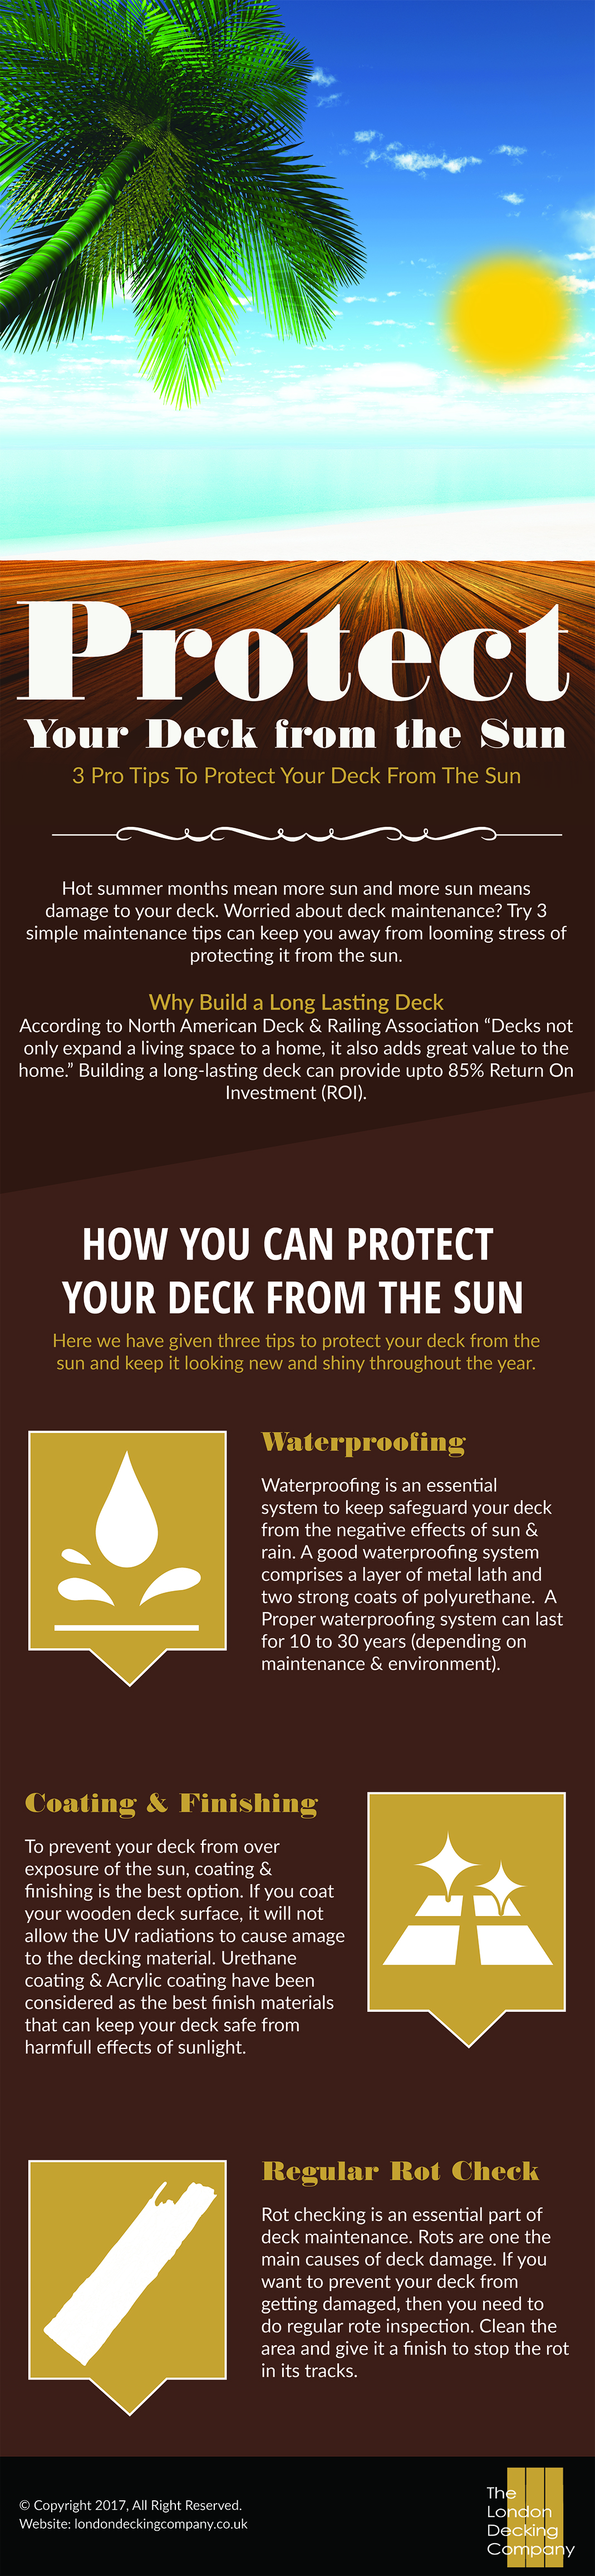 3 Pro Tips to Protect your Deck from the Sun